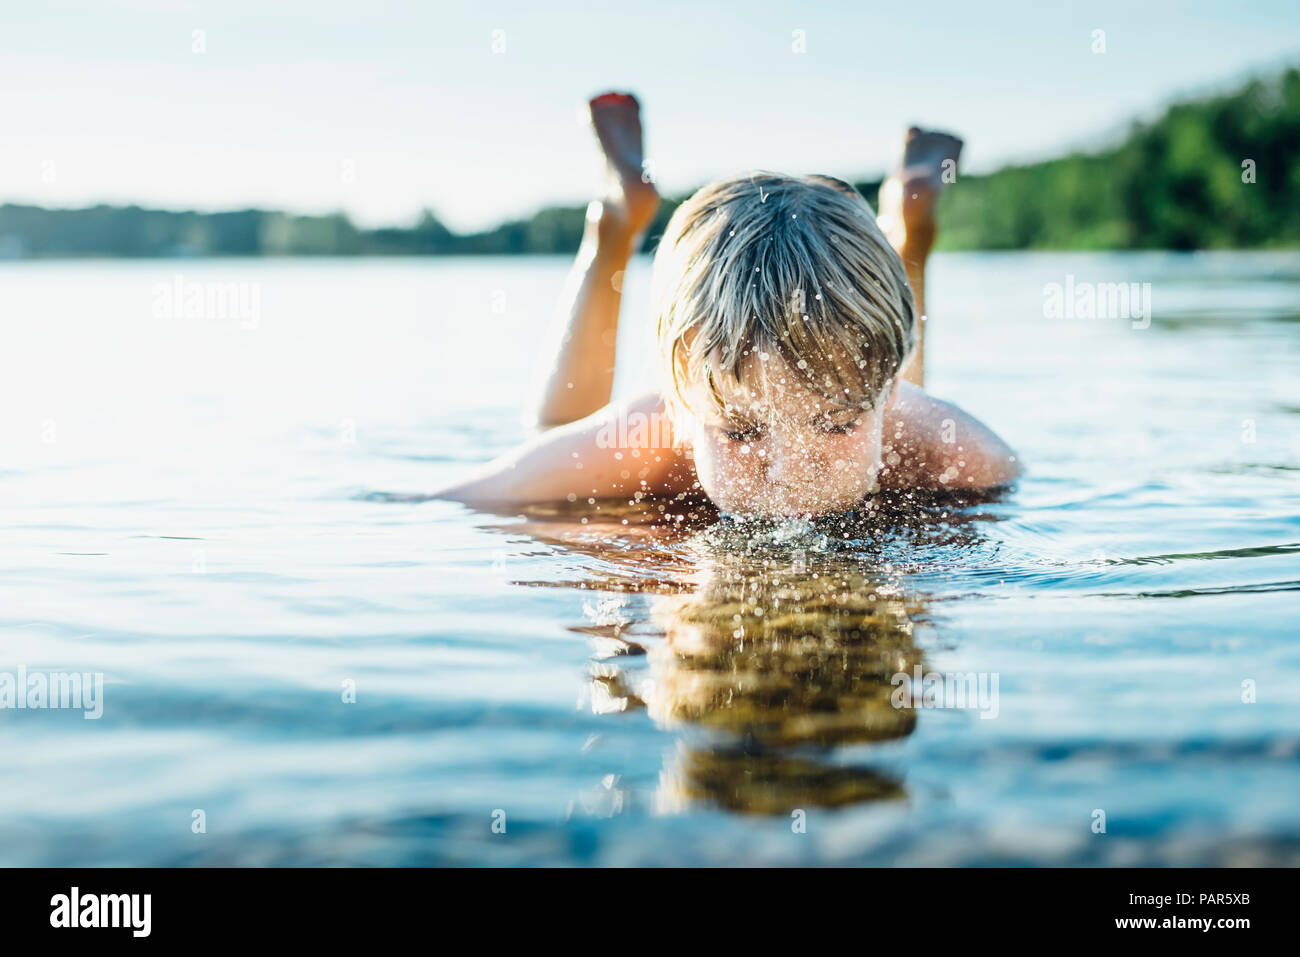 Boy in a lake blowing into water Stock Photo